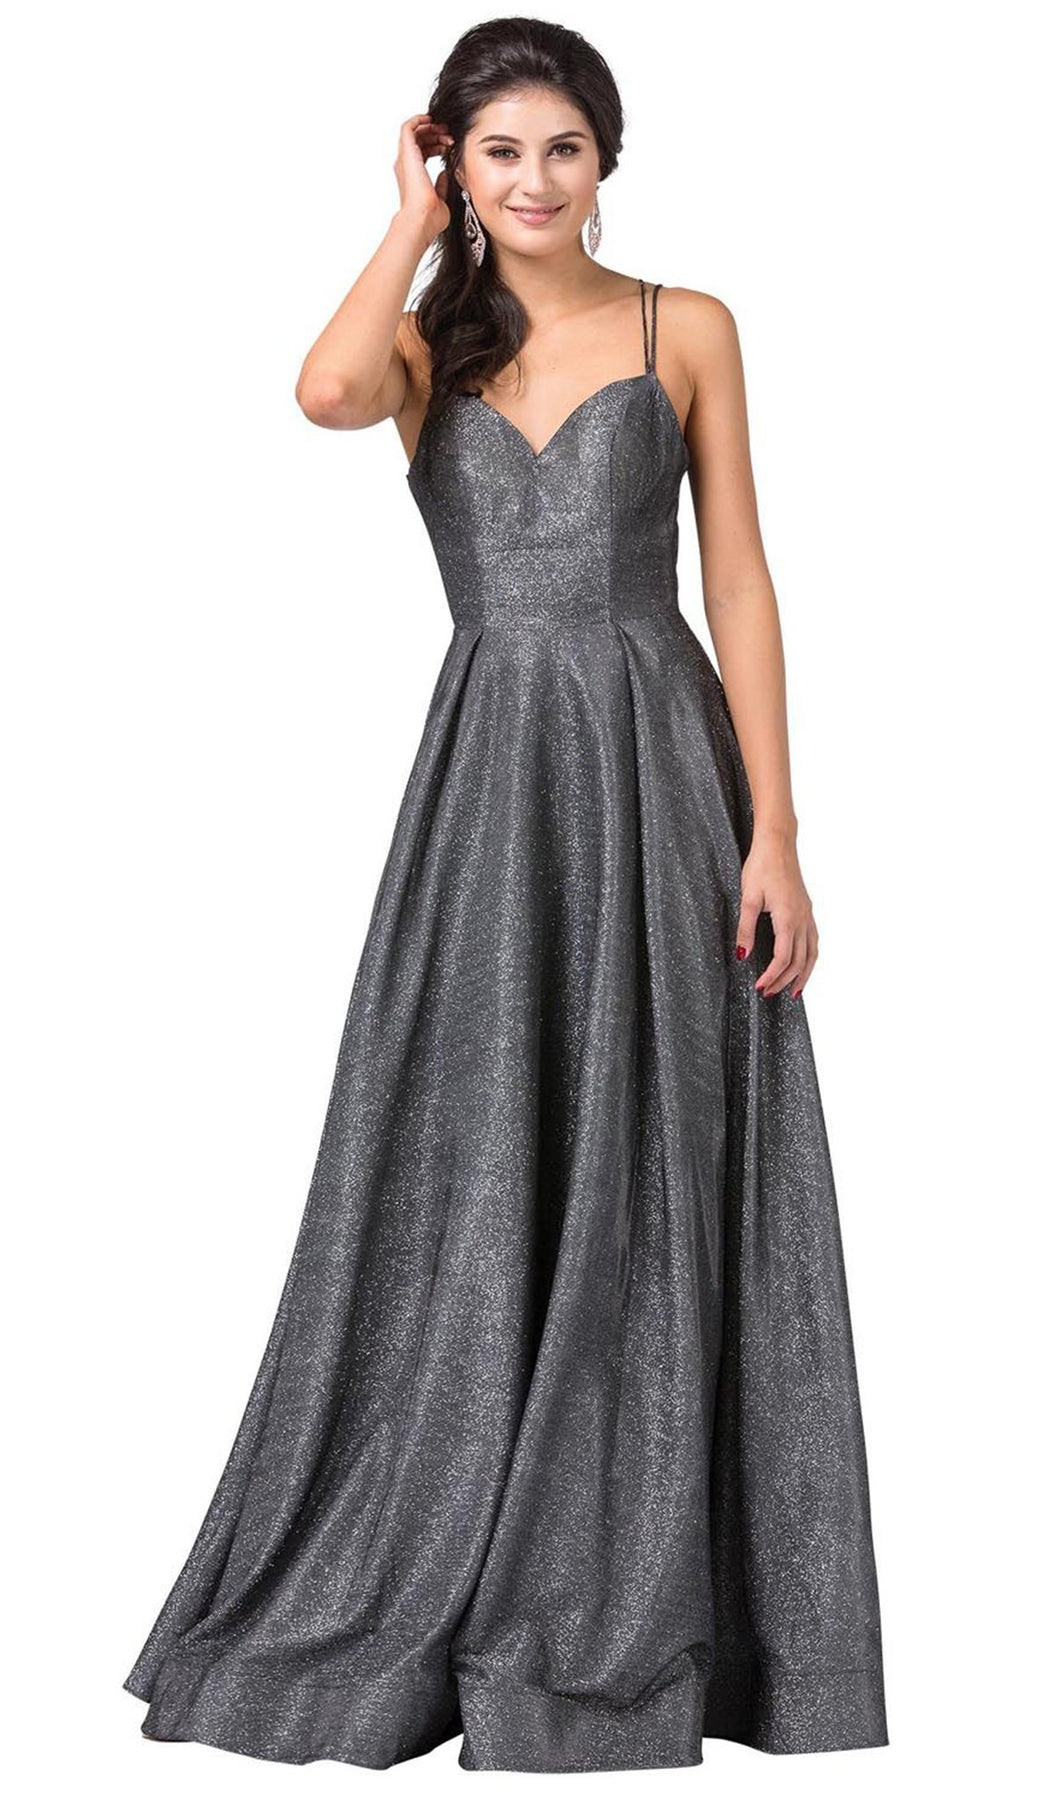 Dancing Queen - 2611 Sweetheart Lace Up Back Metallic Jersey Gown In Gray and Silver